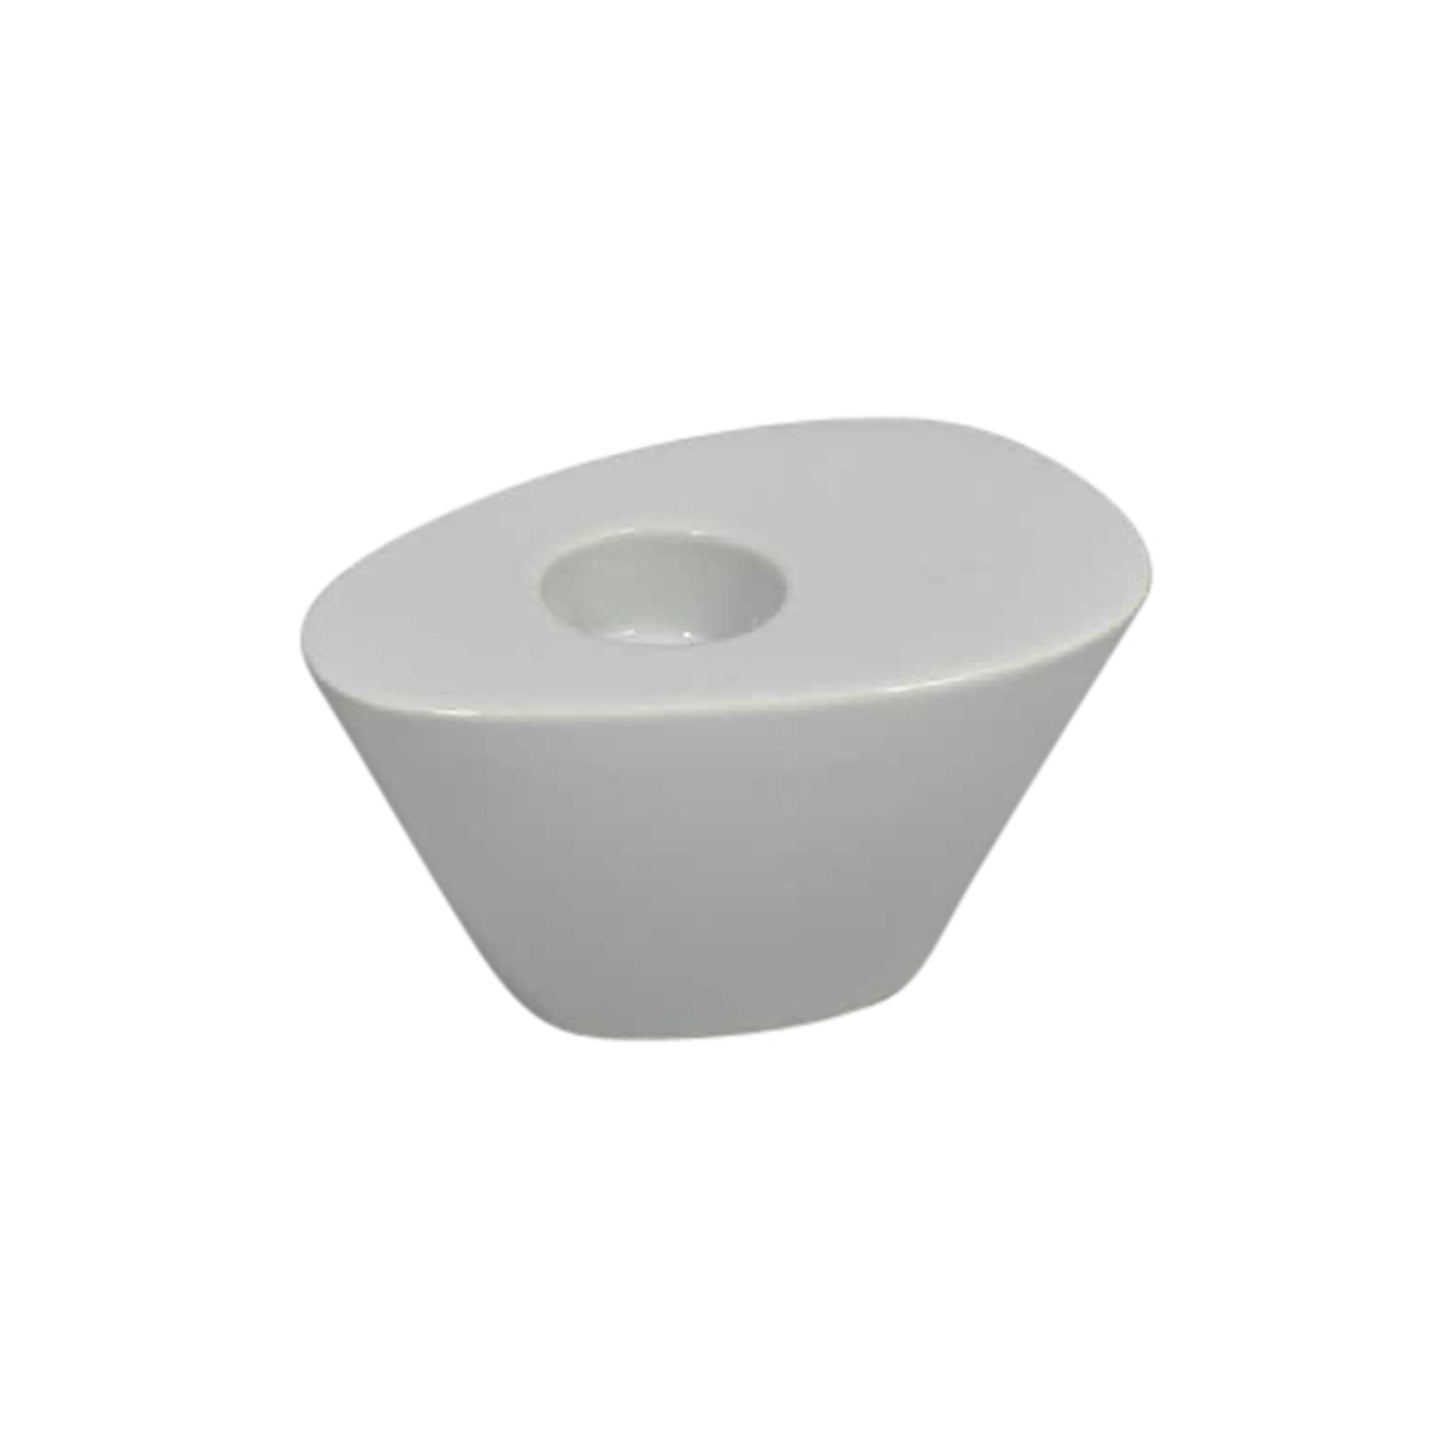 WHITE WEDGE CANDLE HOLDER 4.5"